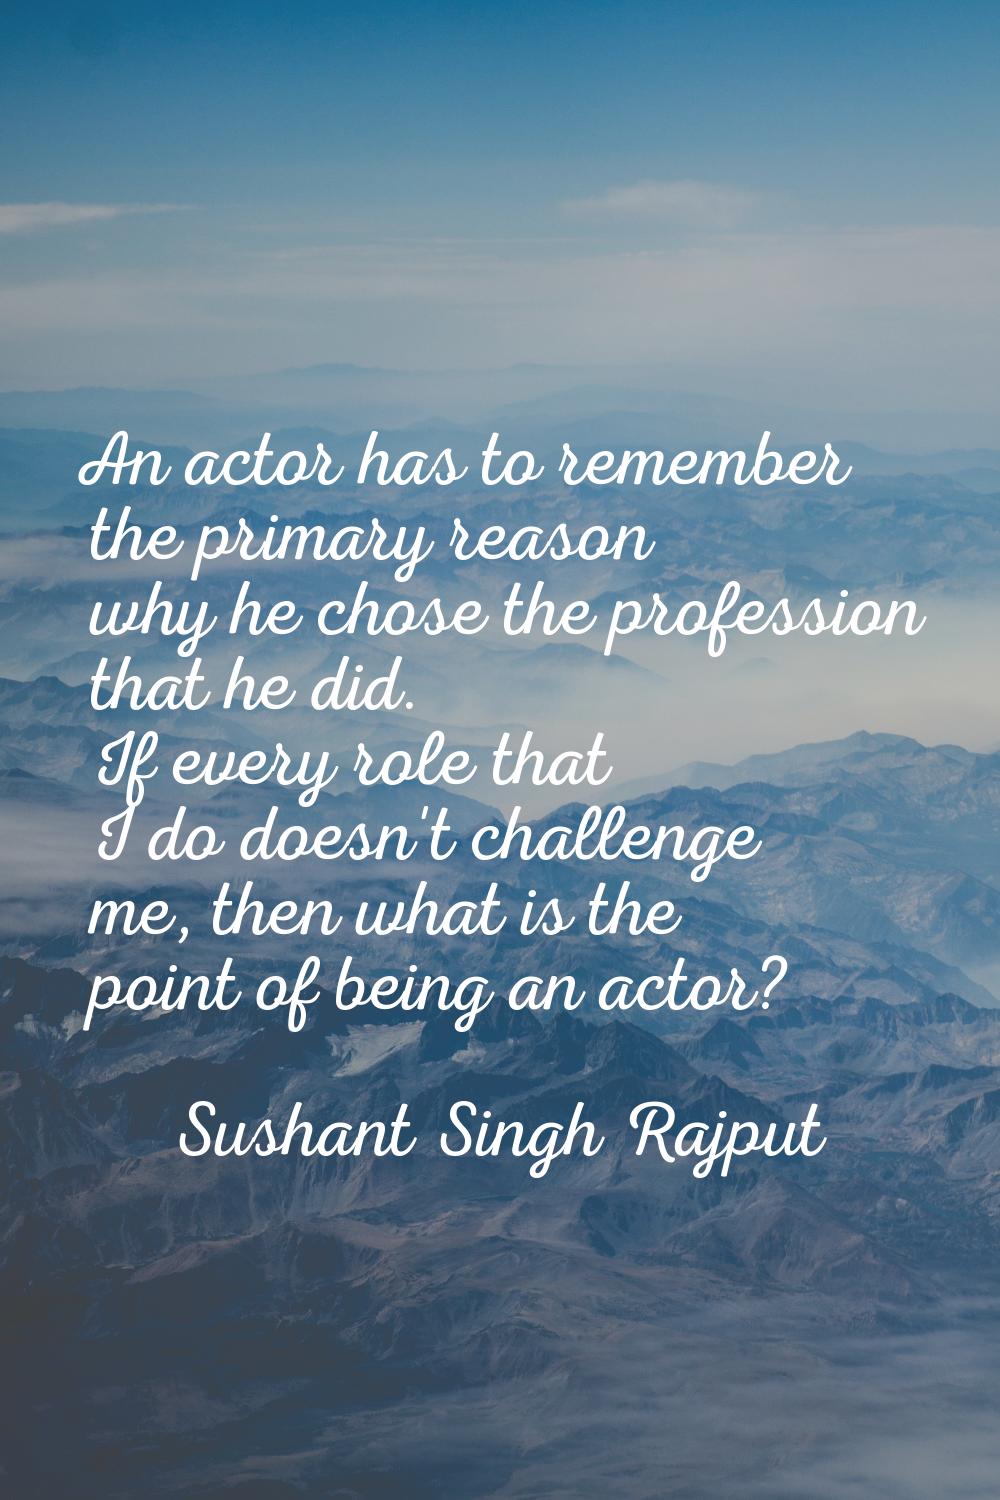 An actor has to remember the primary reason why he chose the profession that he did. If every role 